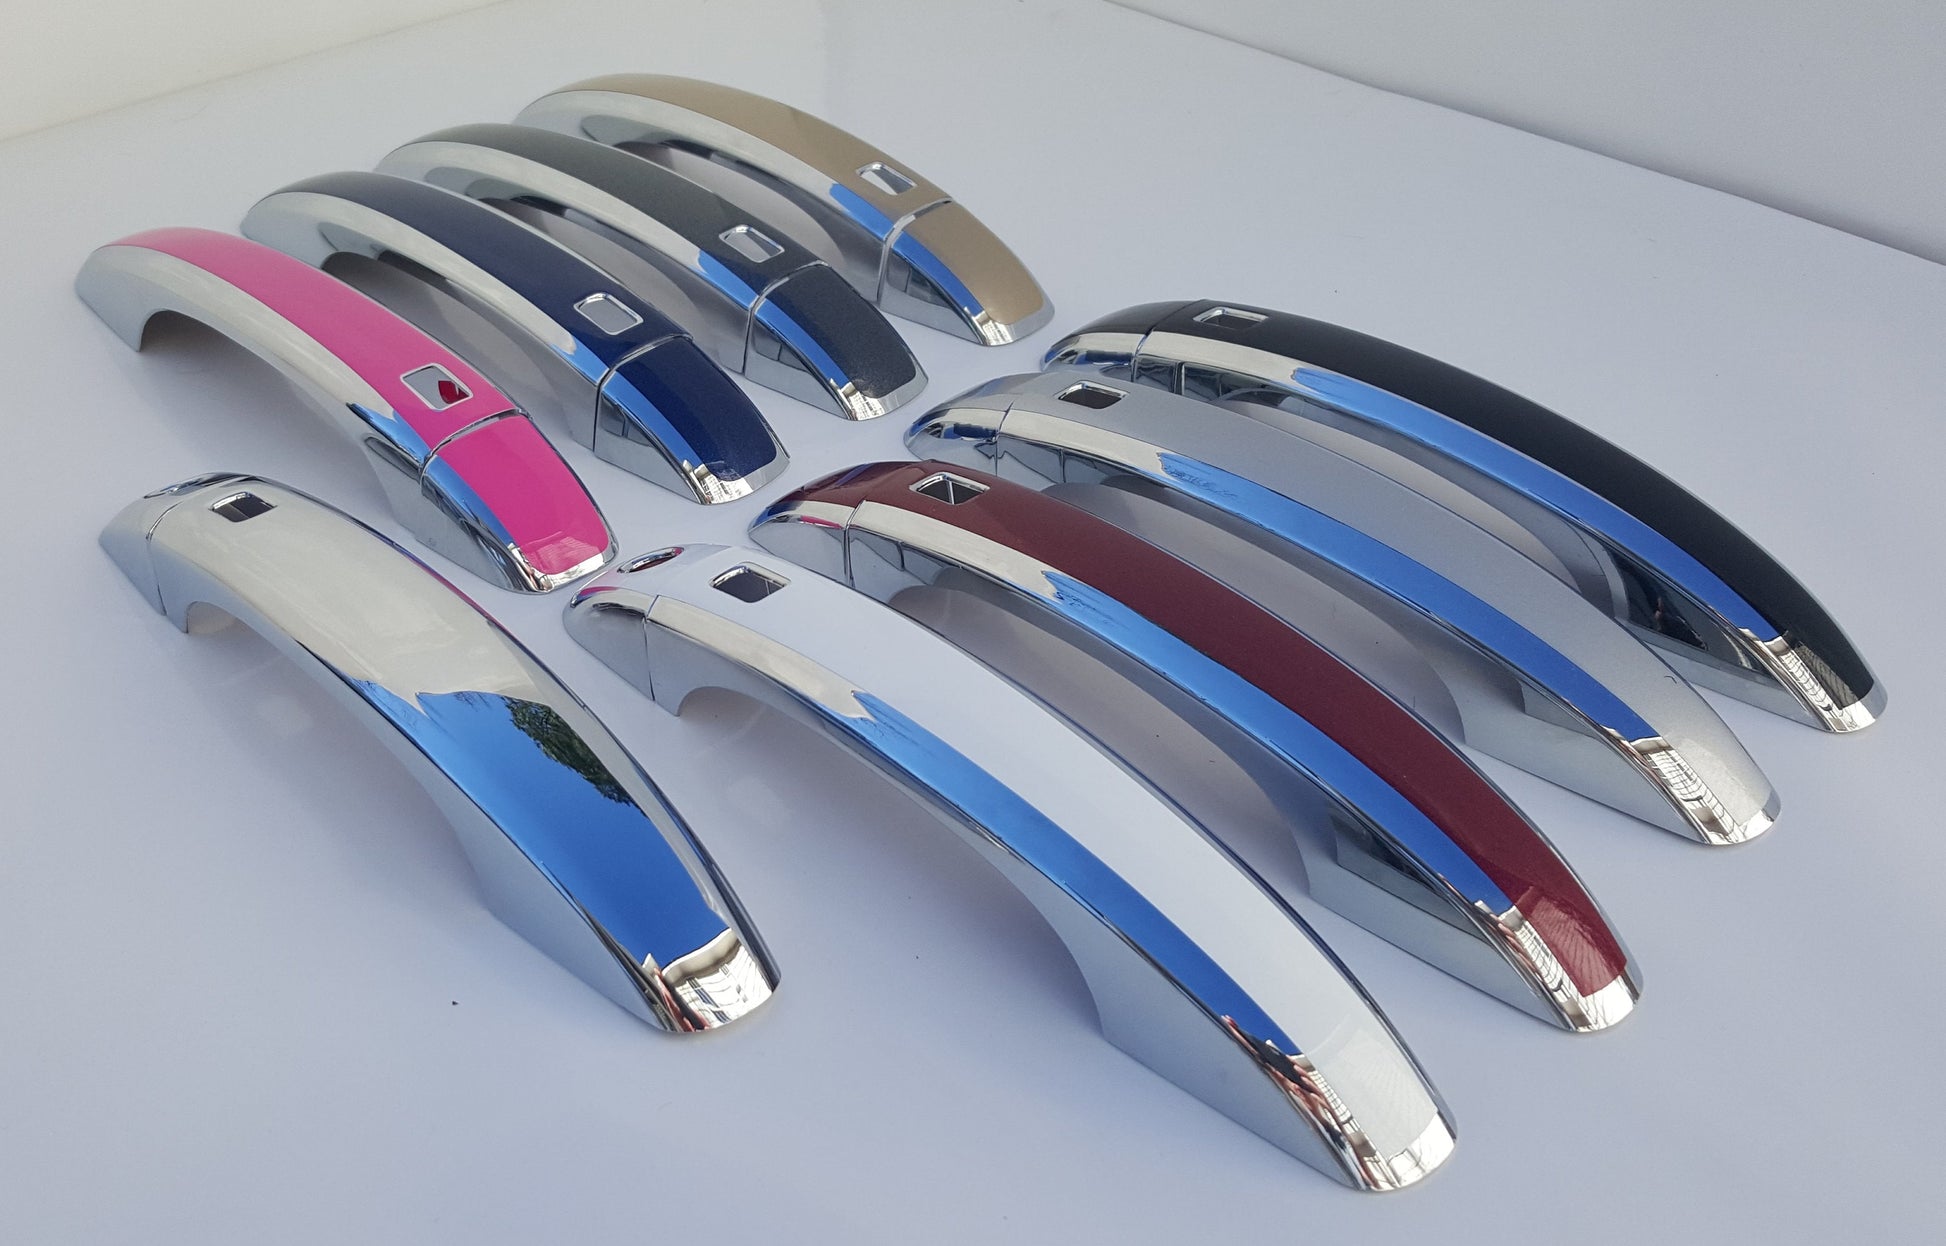 Full Set of Custom Chrome Door Handle Overlays / Covers For the 2012 – 2014 Audi Q3 -- You Choose the Middle Color Insert